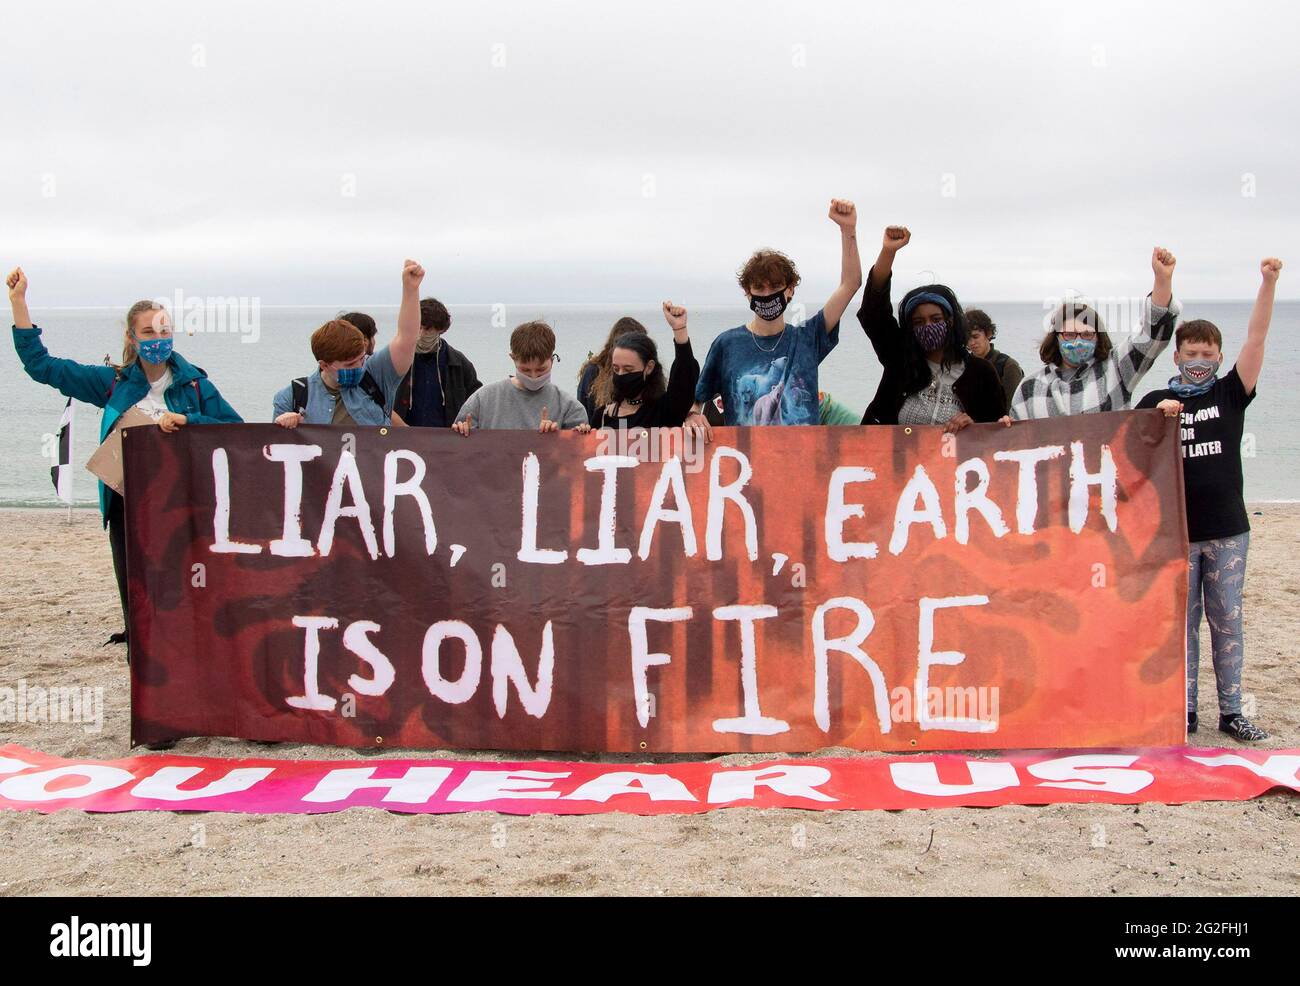 Cornwall, UK. June 11 2021: Climate strikers come together on Gyllyngvase beach as the G7 begins in Cornwall the same weekend. the strikers stand with raised fists behind a banner that reads 'Liar Liar earth is on fire' 11th June 2021. Anna Hatfield/Pathos Credit: One Up Top Editorial Images/Alamy Live News Stock Photo